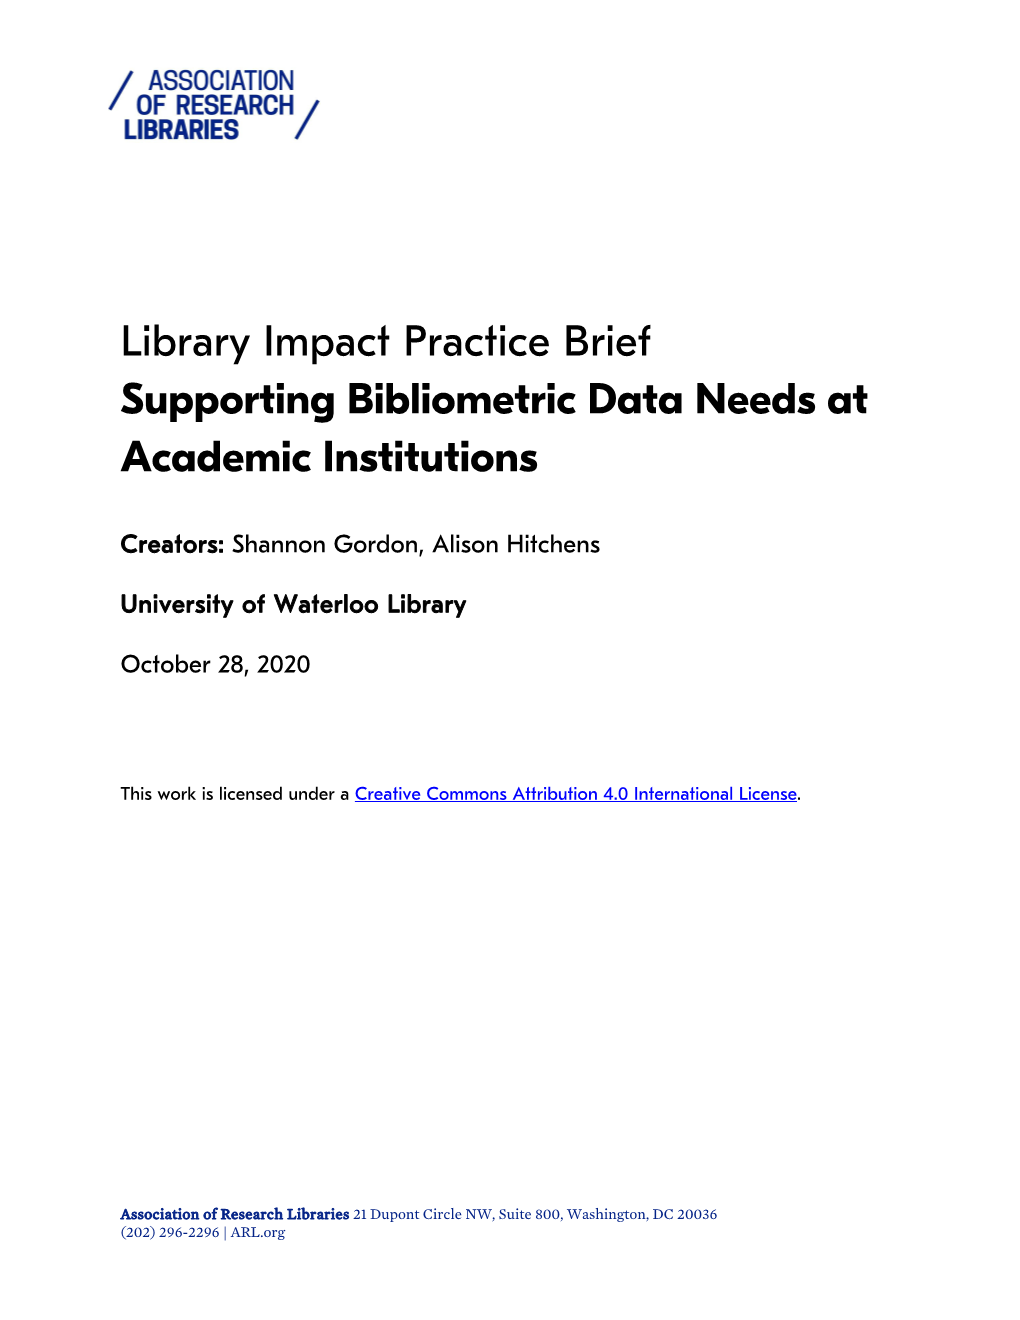 Supporting Bibliometric Data Needs at Academic Institutions